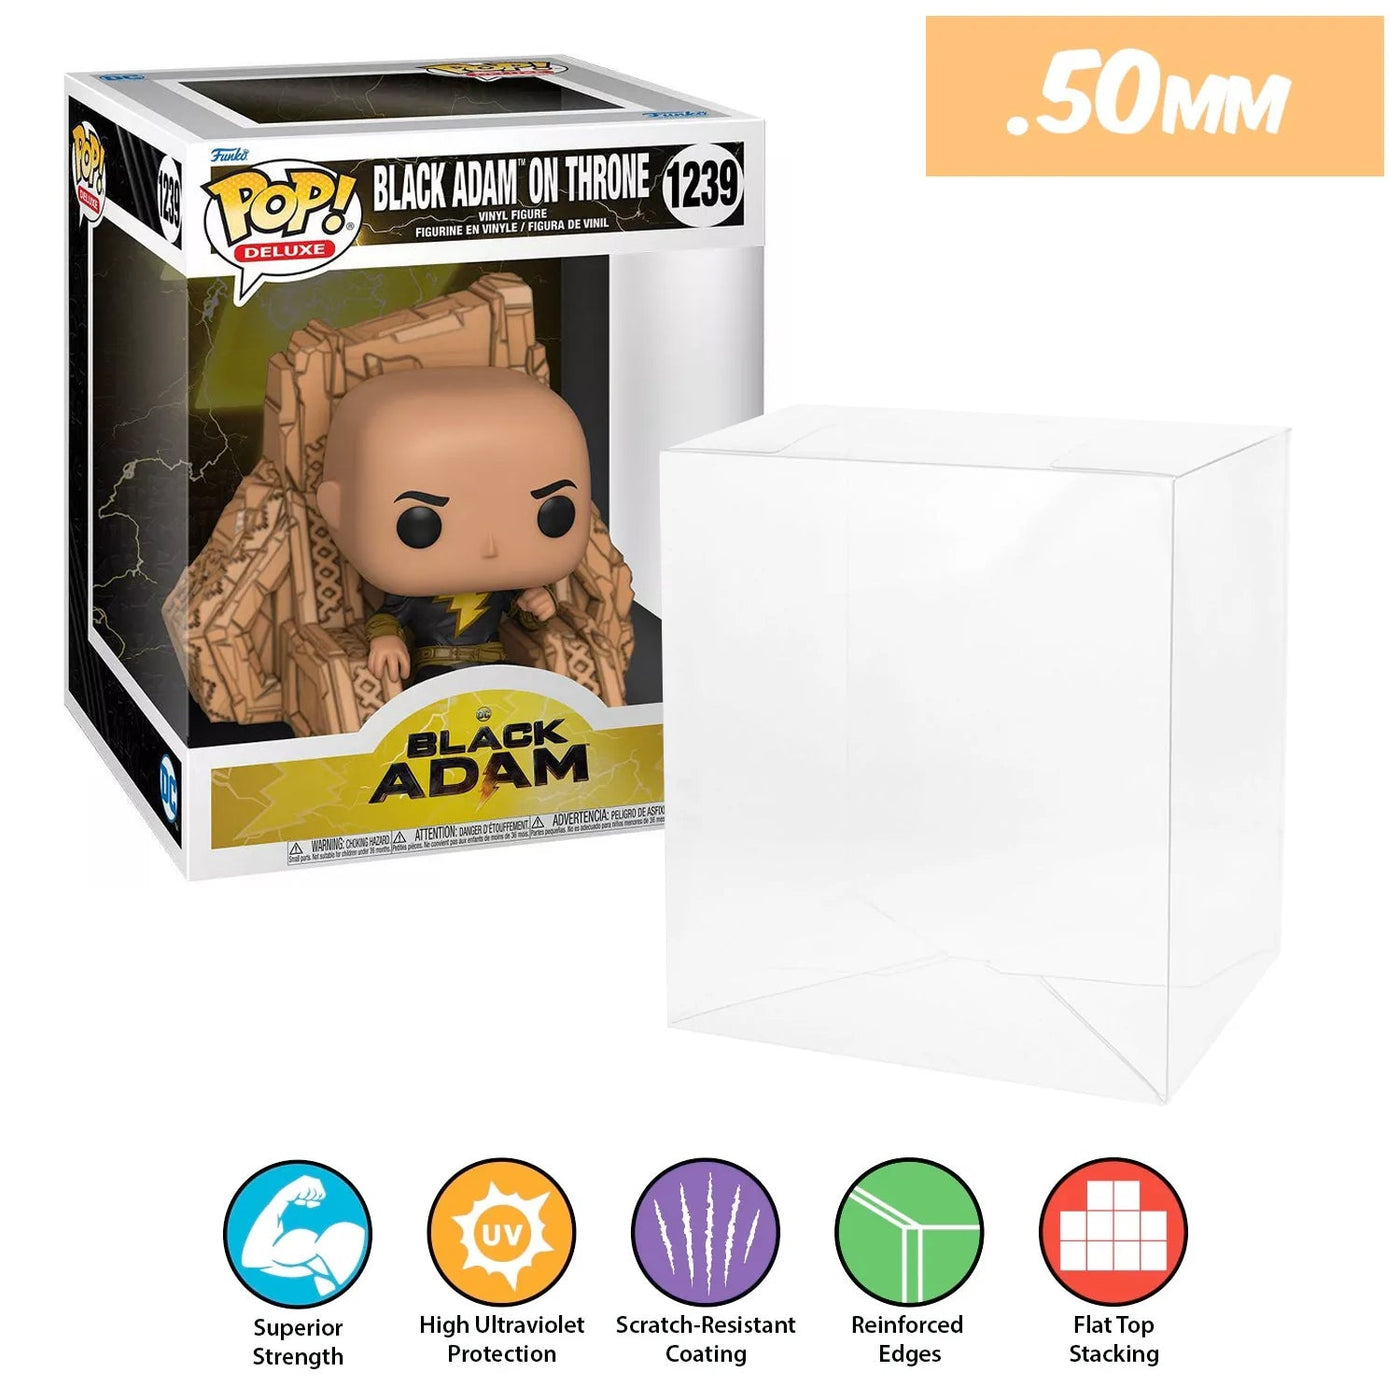 black adam on throne pop deluxe best funko pop protectors thick strong uv scratch flat top stack vinyl display geek plastic shield vaulted eco armor fits collect protect display case kollector protector